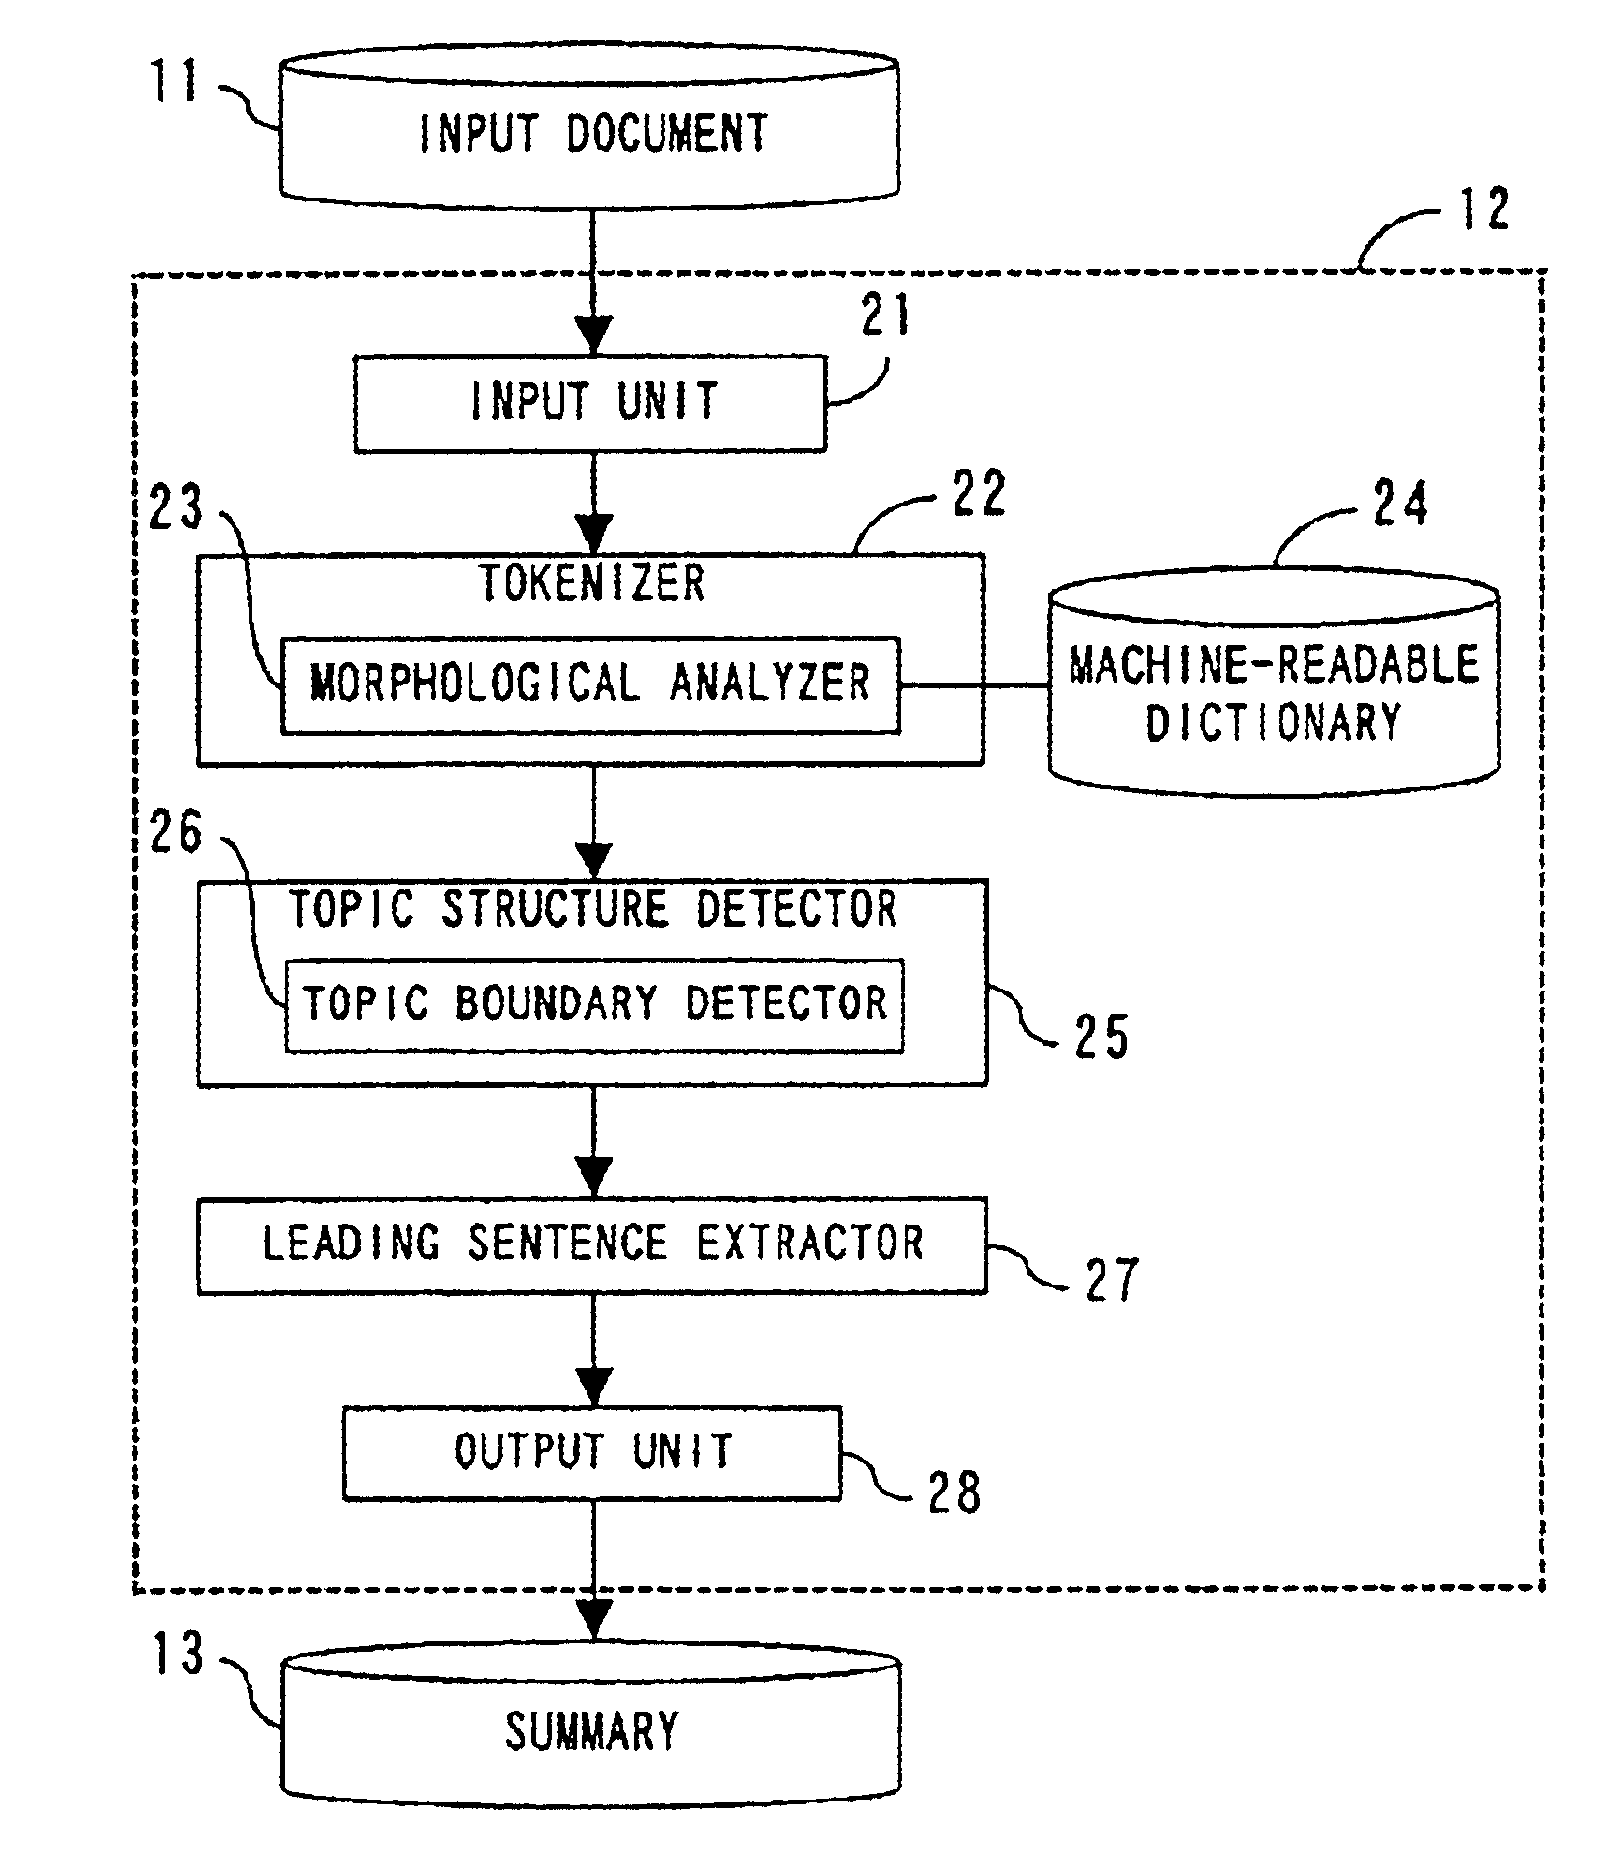 Apparatus and method for generating a summary according to hierarchical structure of topic